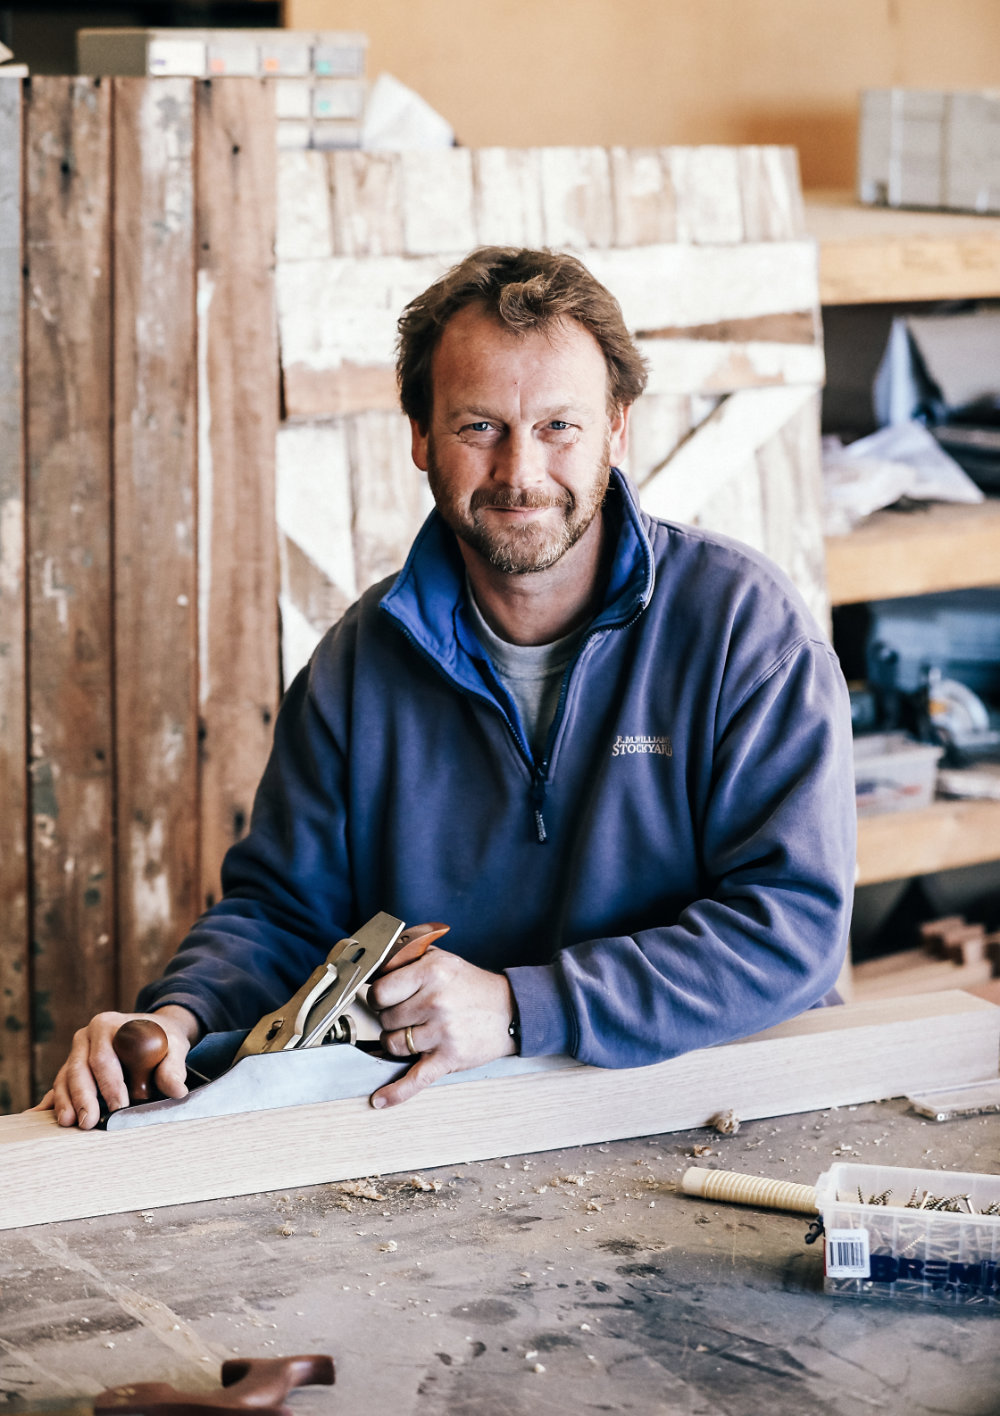 Smiling craftsman in a workshop with a wood plane